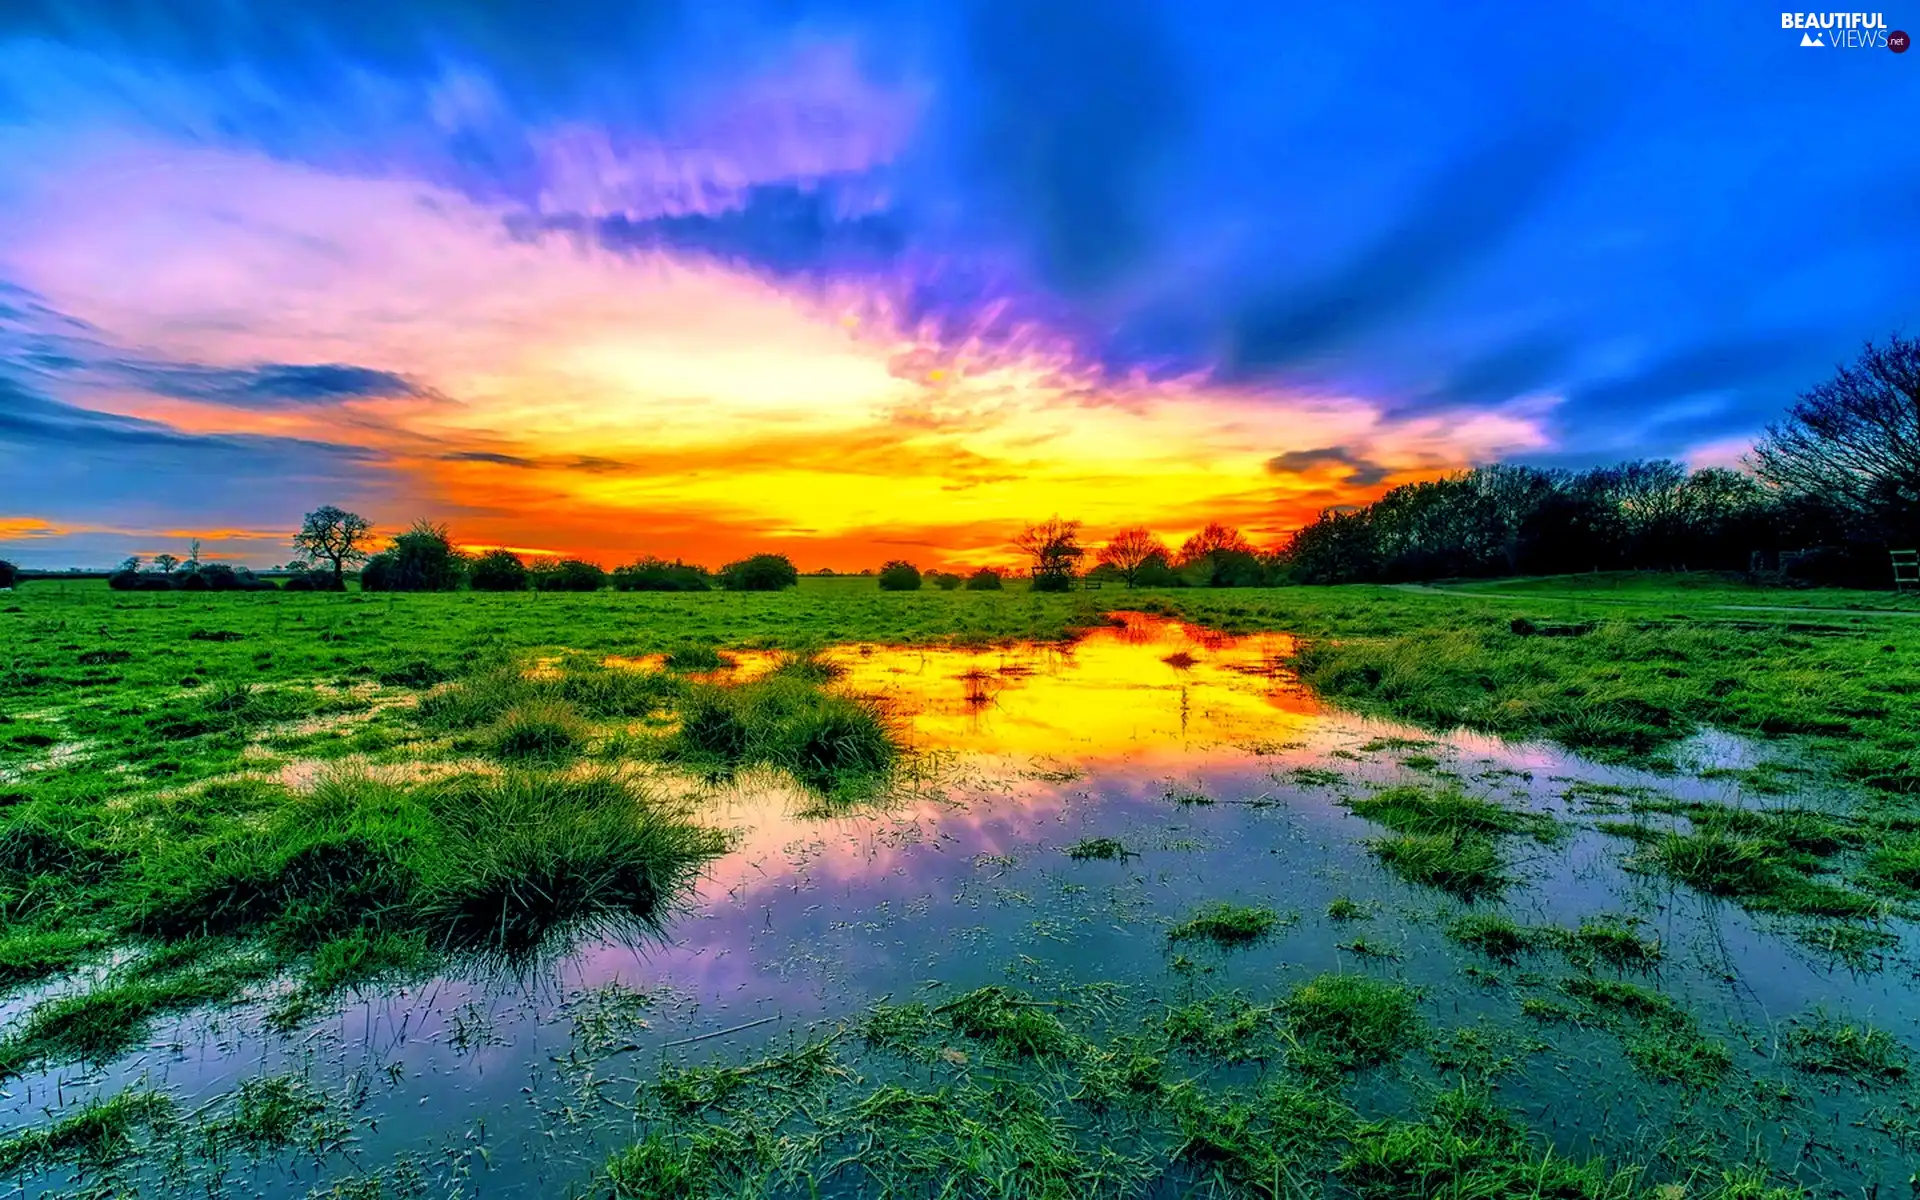 clouds, Meadow, trees, viewes, Great Sunsets, swamp